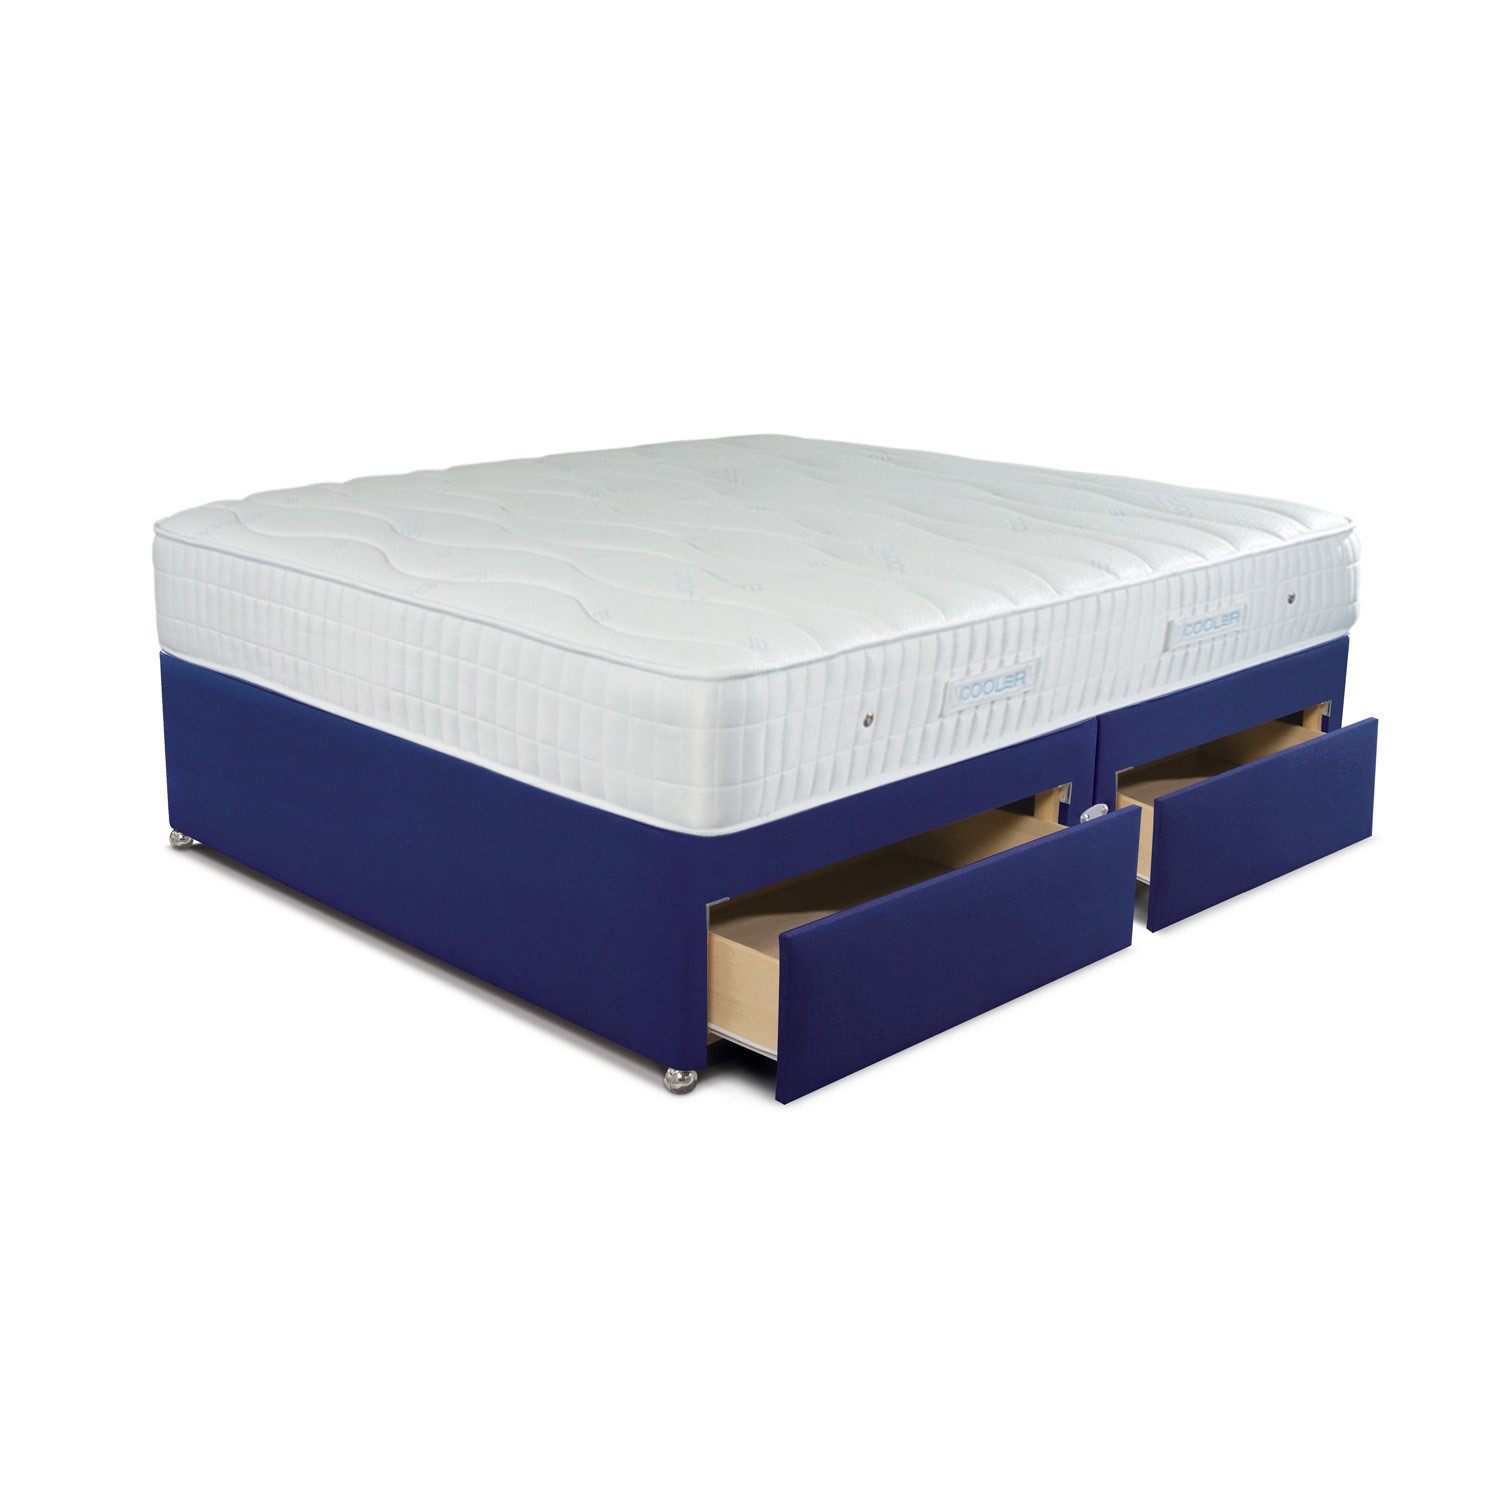 Photo of Sleepeezee double 4 drawer divan bed in plush navy with cooler pinnacle 1000 mattress